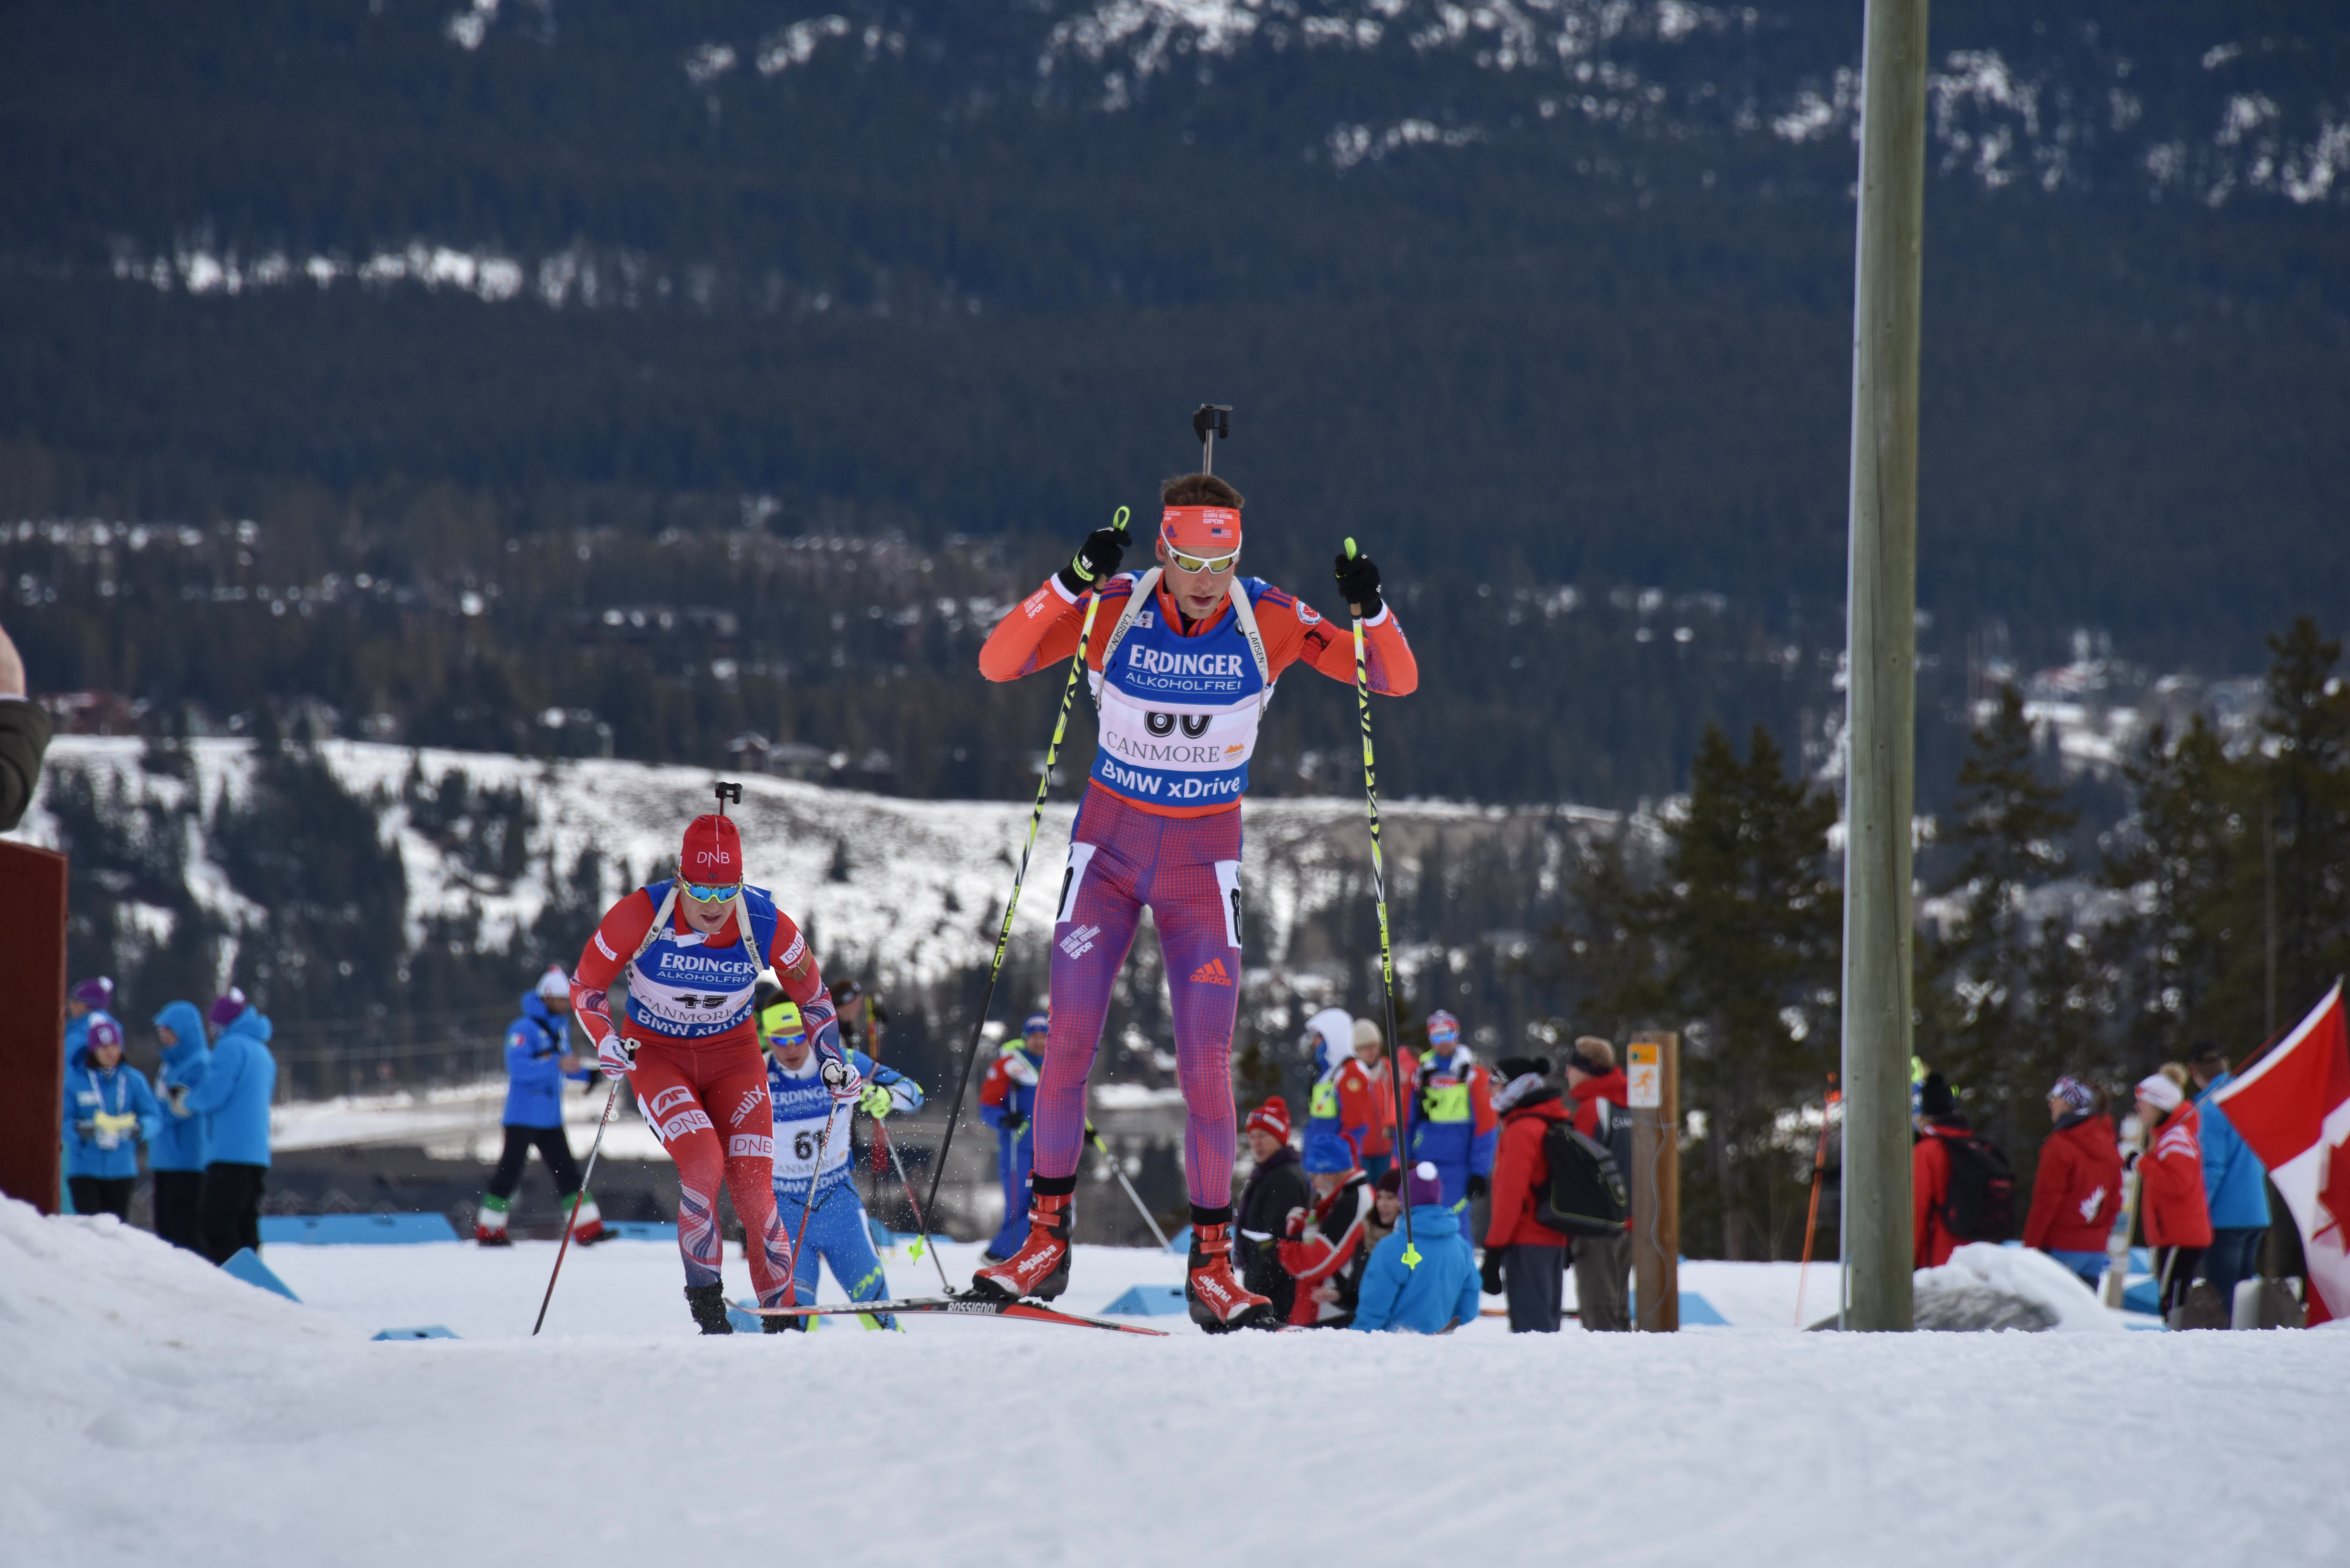 Max Durtschi making his World Cup debut in Canmore, Alberta, last season. (Courtesy photo)